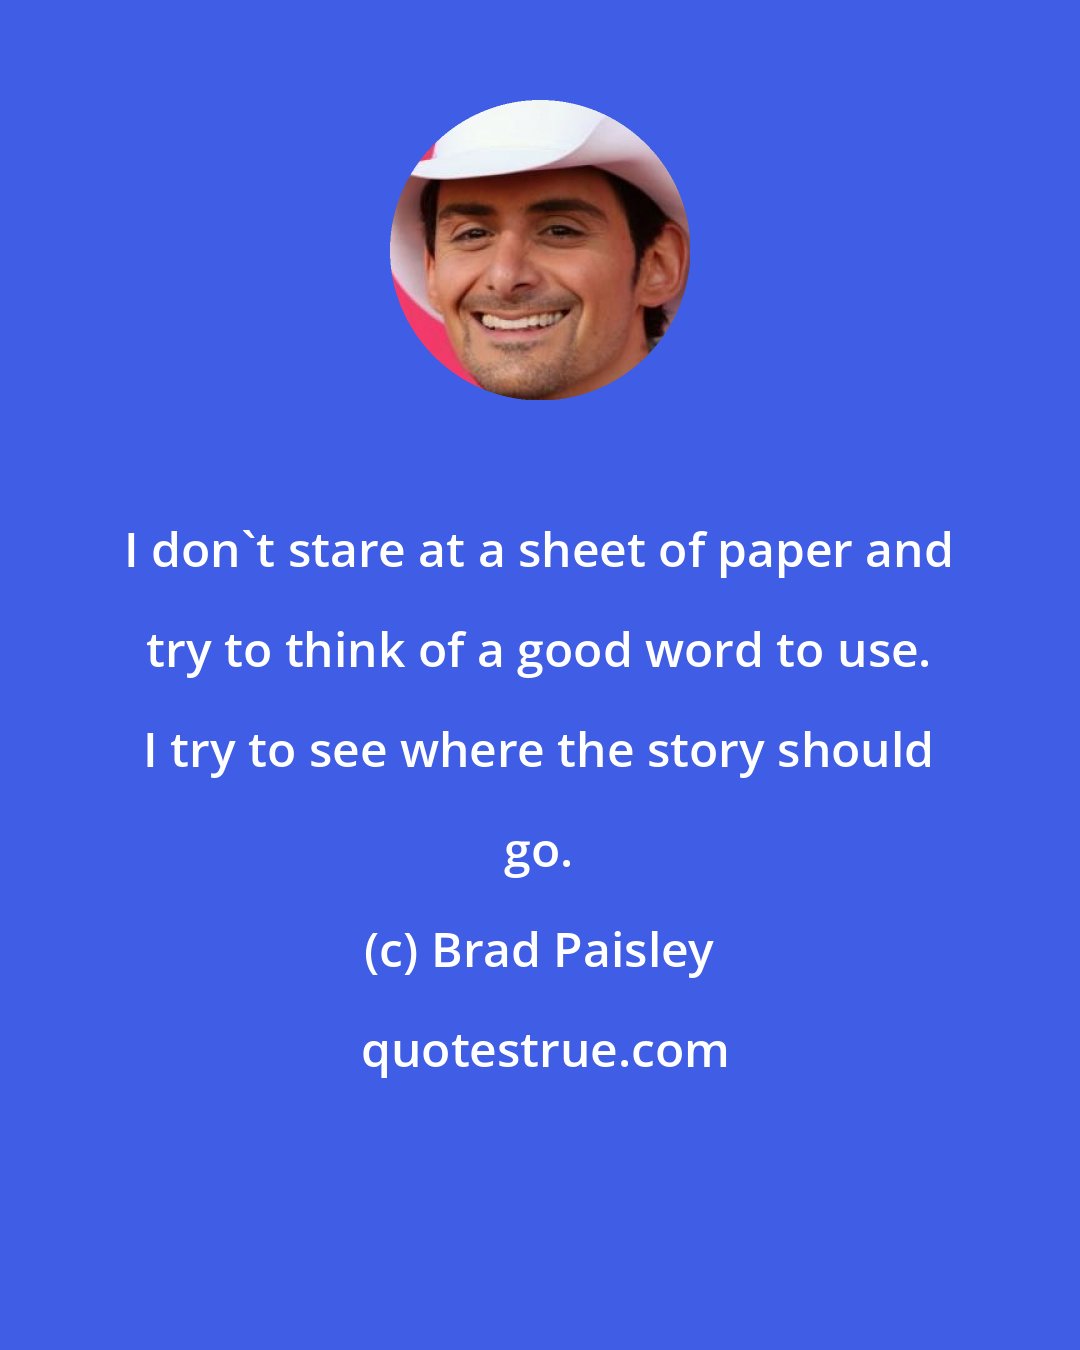 Brad Paisley: I don't stare at a sheet of paper and try to think of a good word to use. I try to see where the story should go.